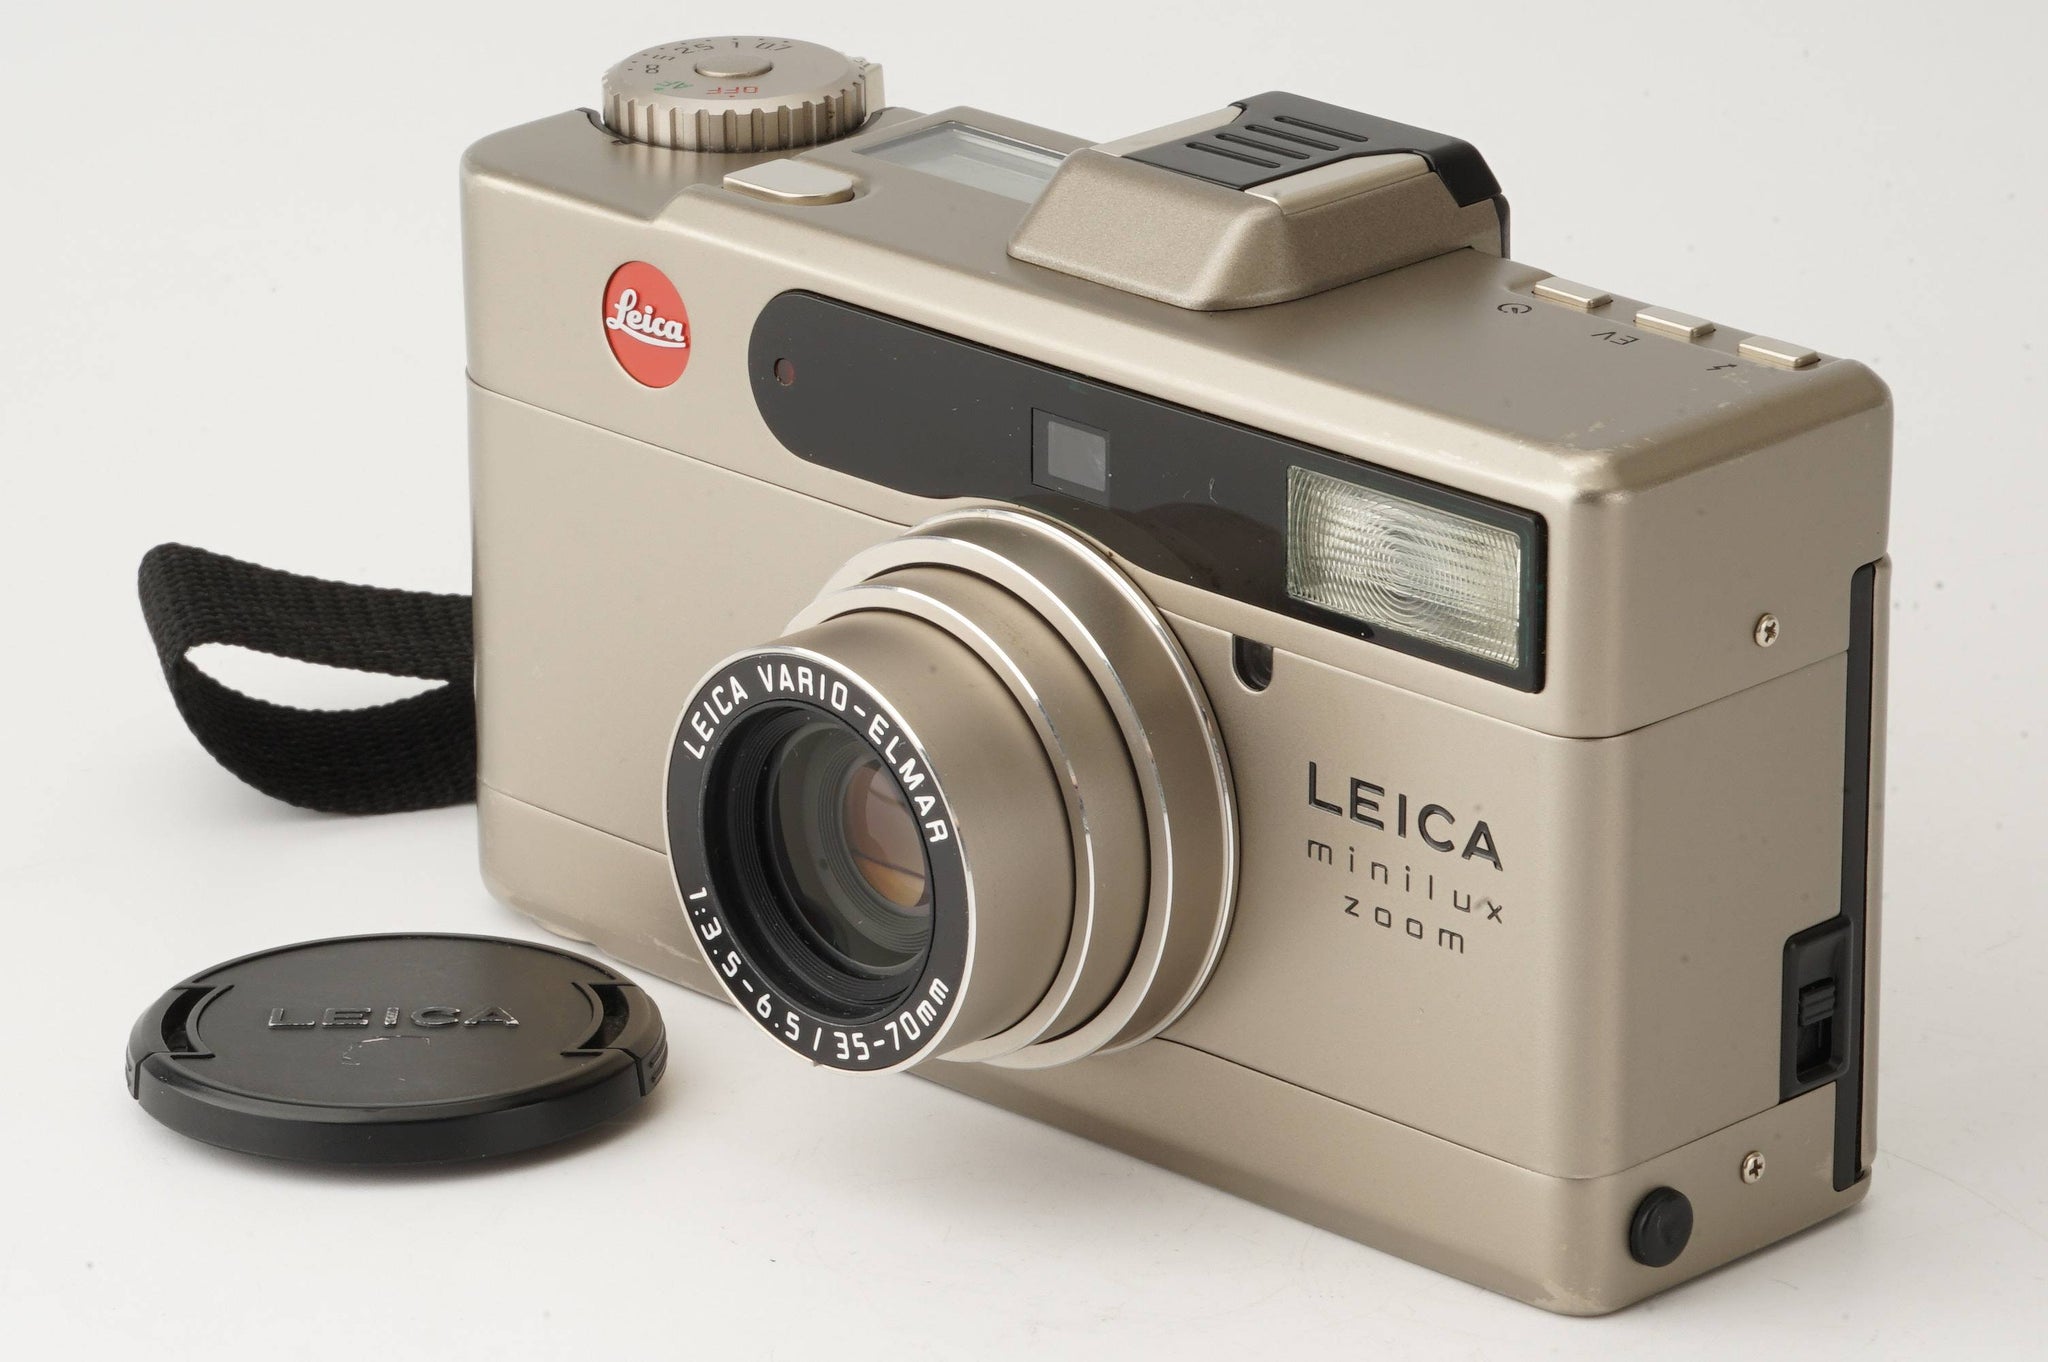 leica minilux zoom(箱・純正ポーチ等付き)純正ポーチ